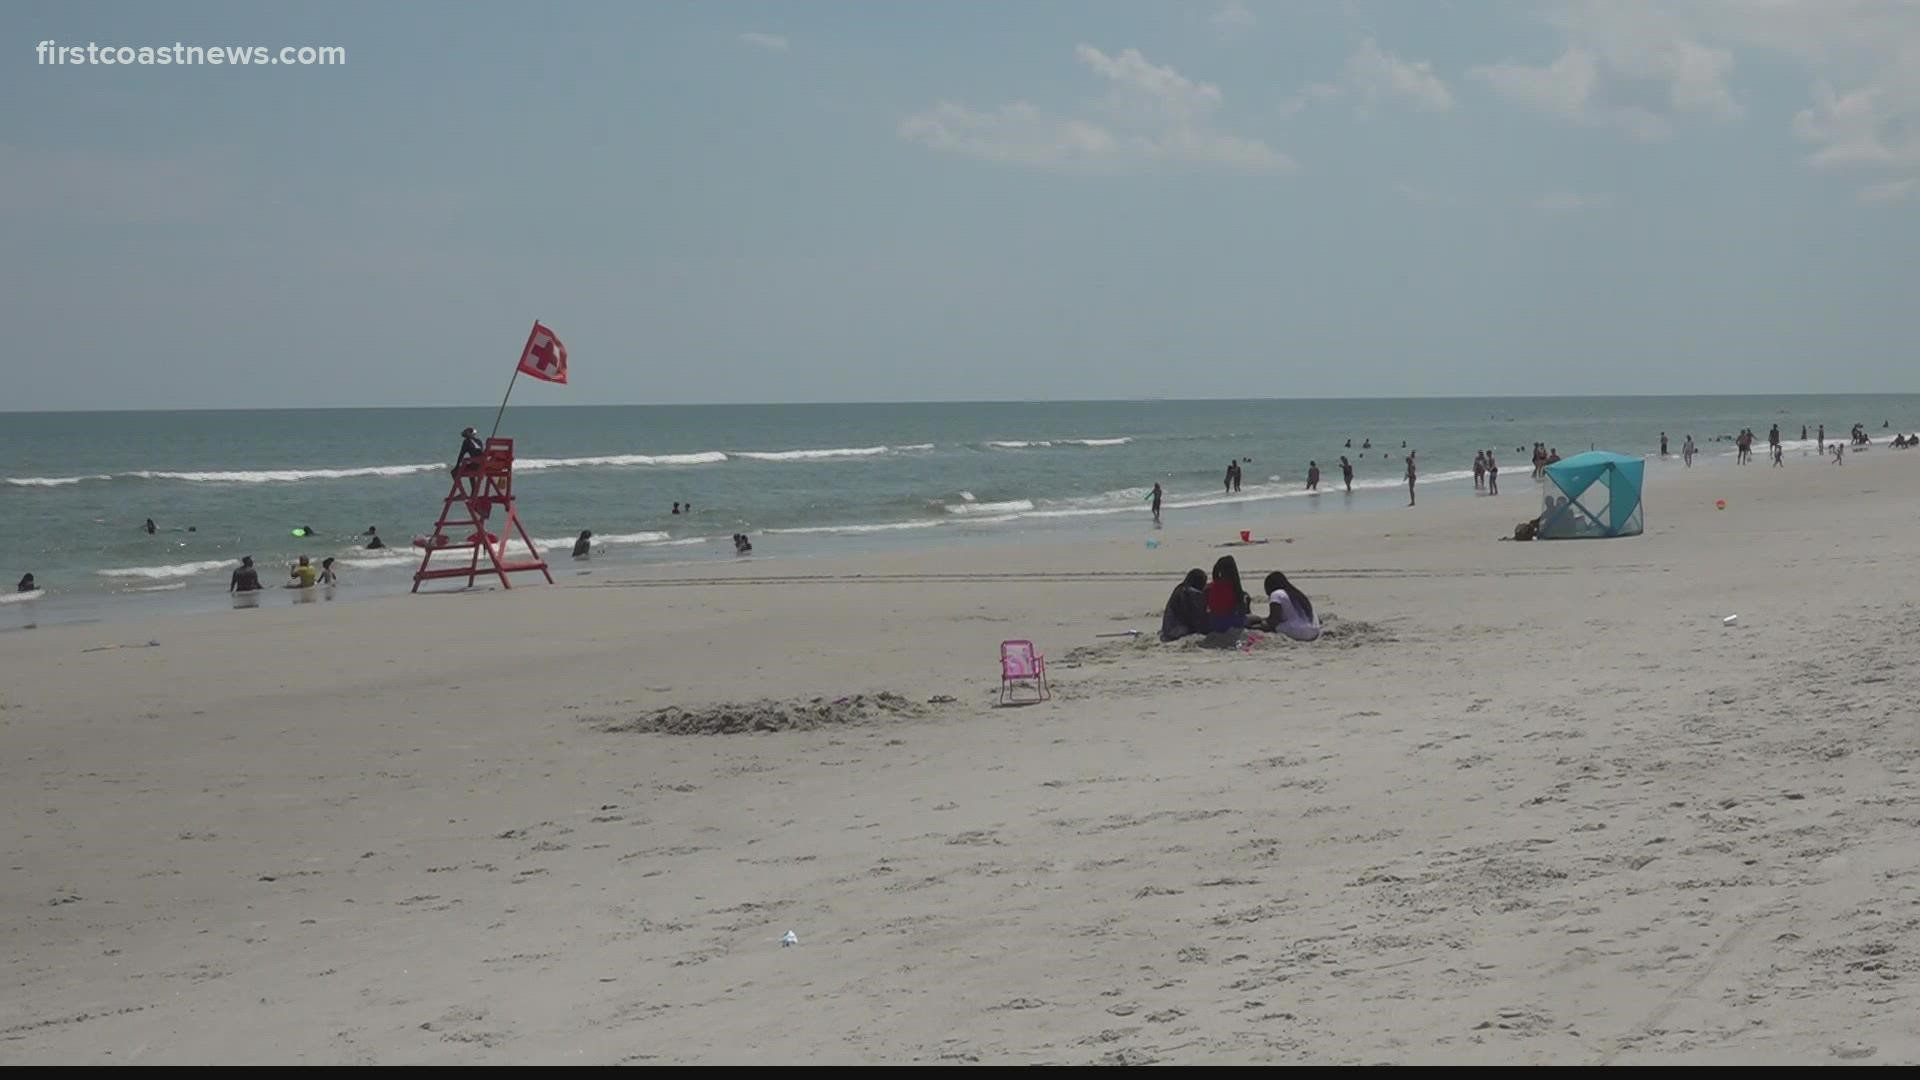 While yellow flags flew above the beaches Sunday, lifeguards warned beachgoers to be on guard for dangerous conditions.